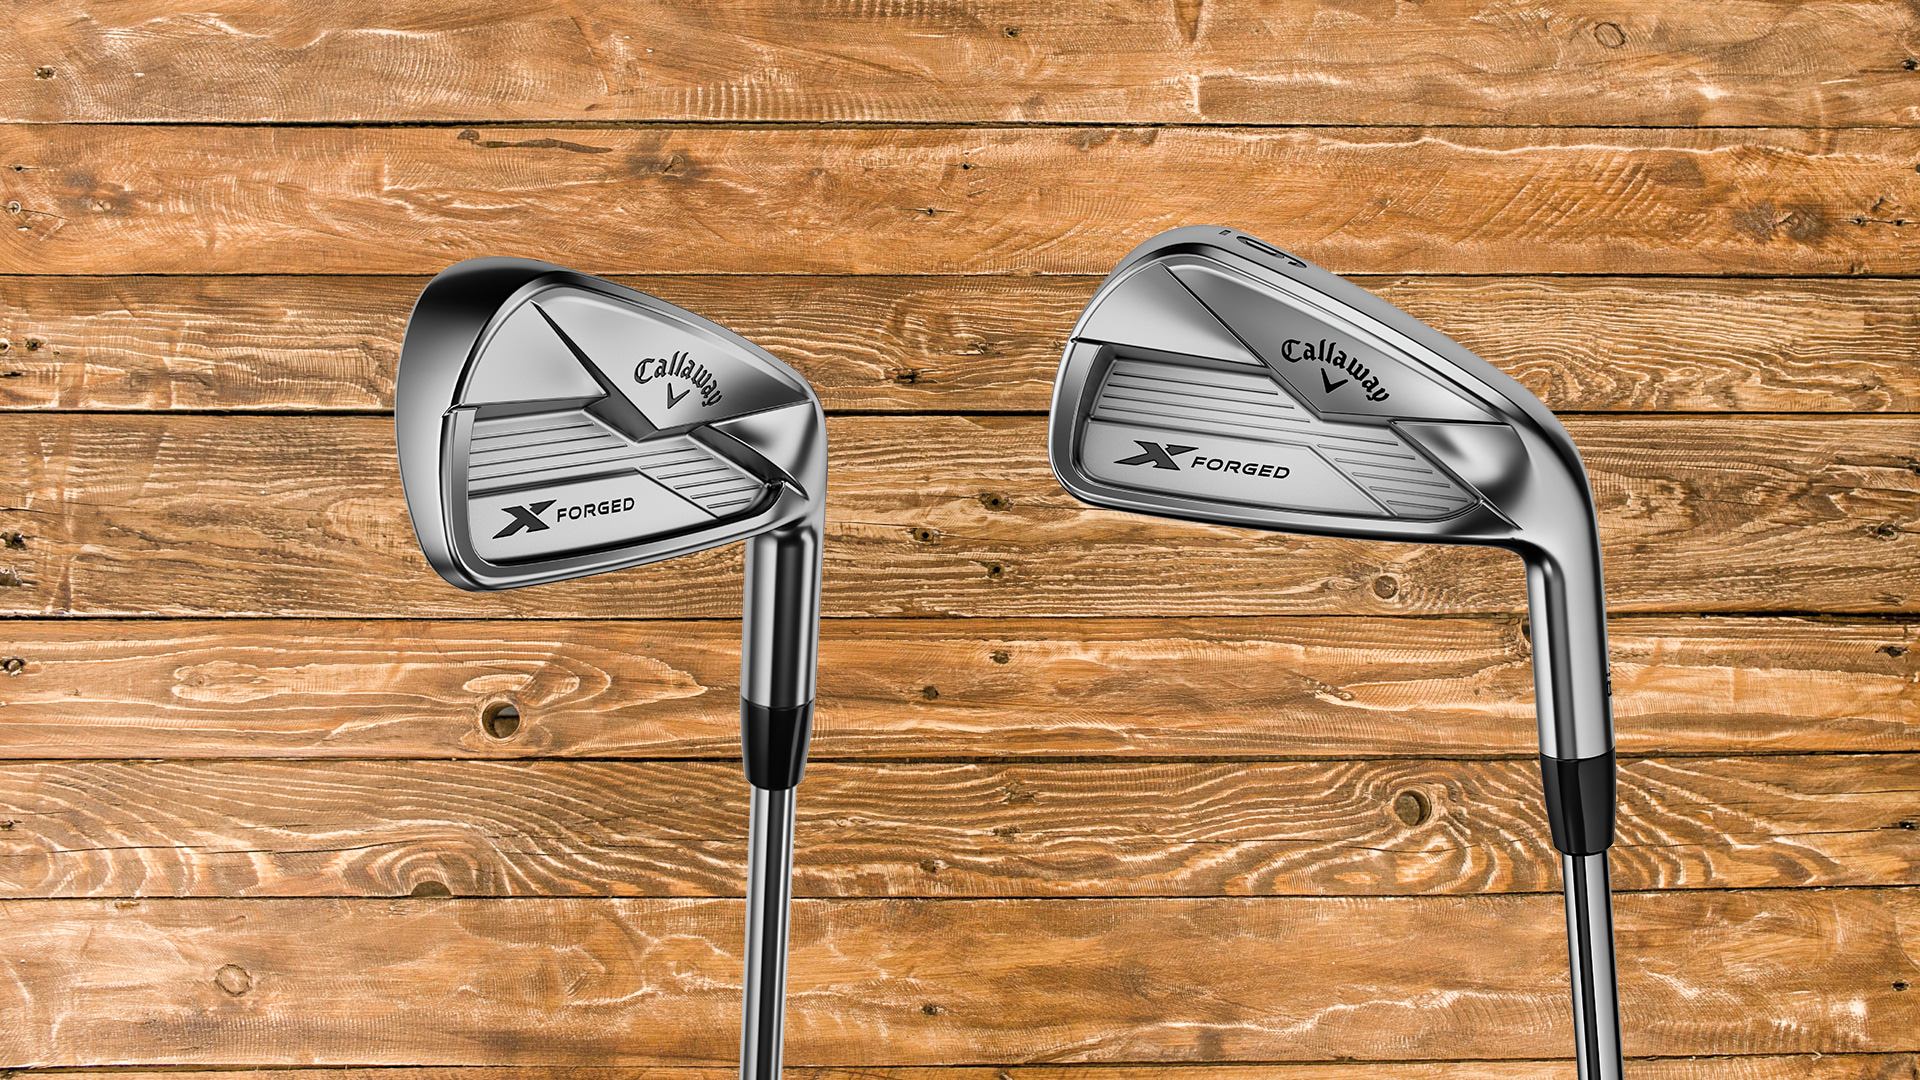 Callaway X Forged irons review